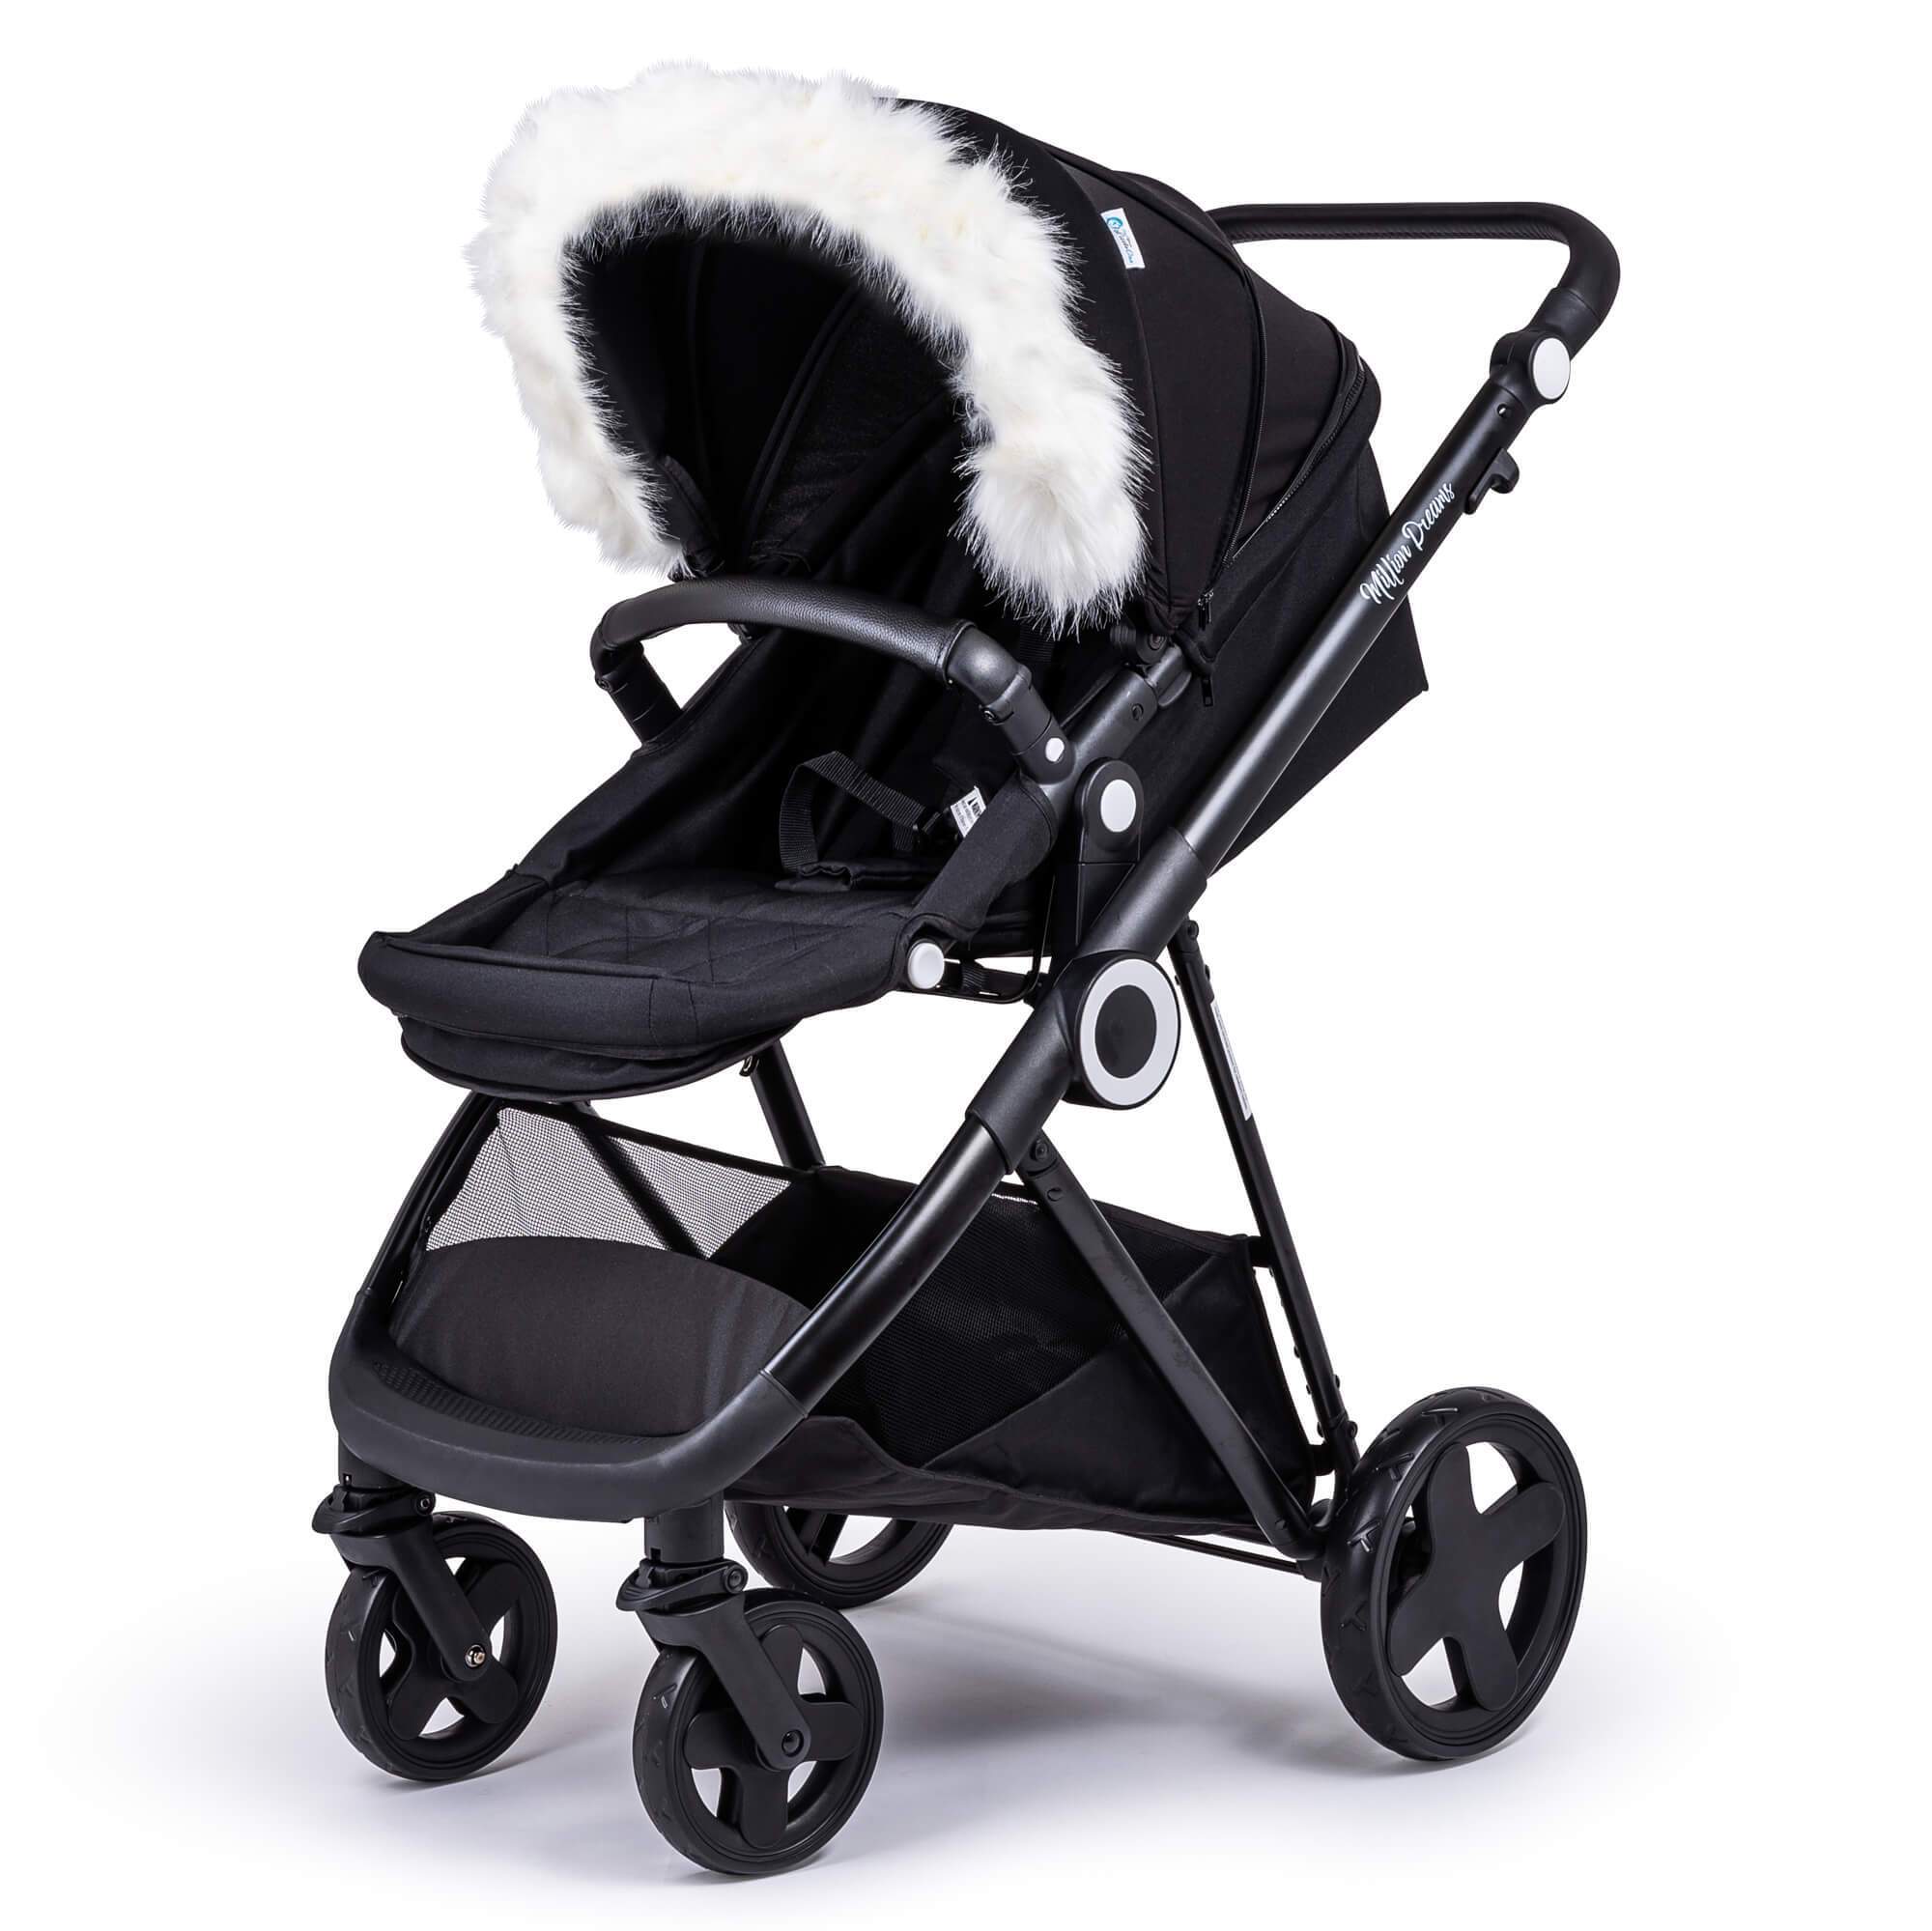 Pram Fur Hood Trim Attachment for Pushchair Compatible with Maclaren - White / Fits All Models | For Your Little One